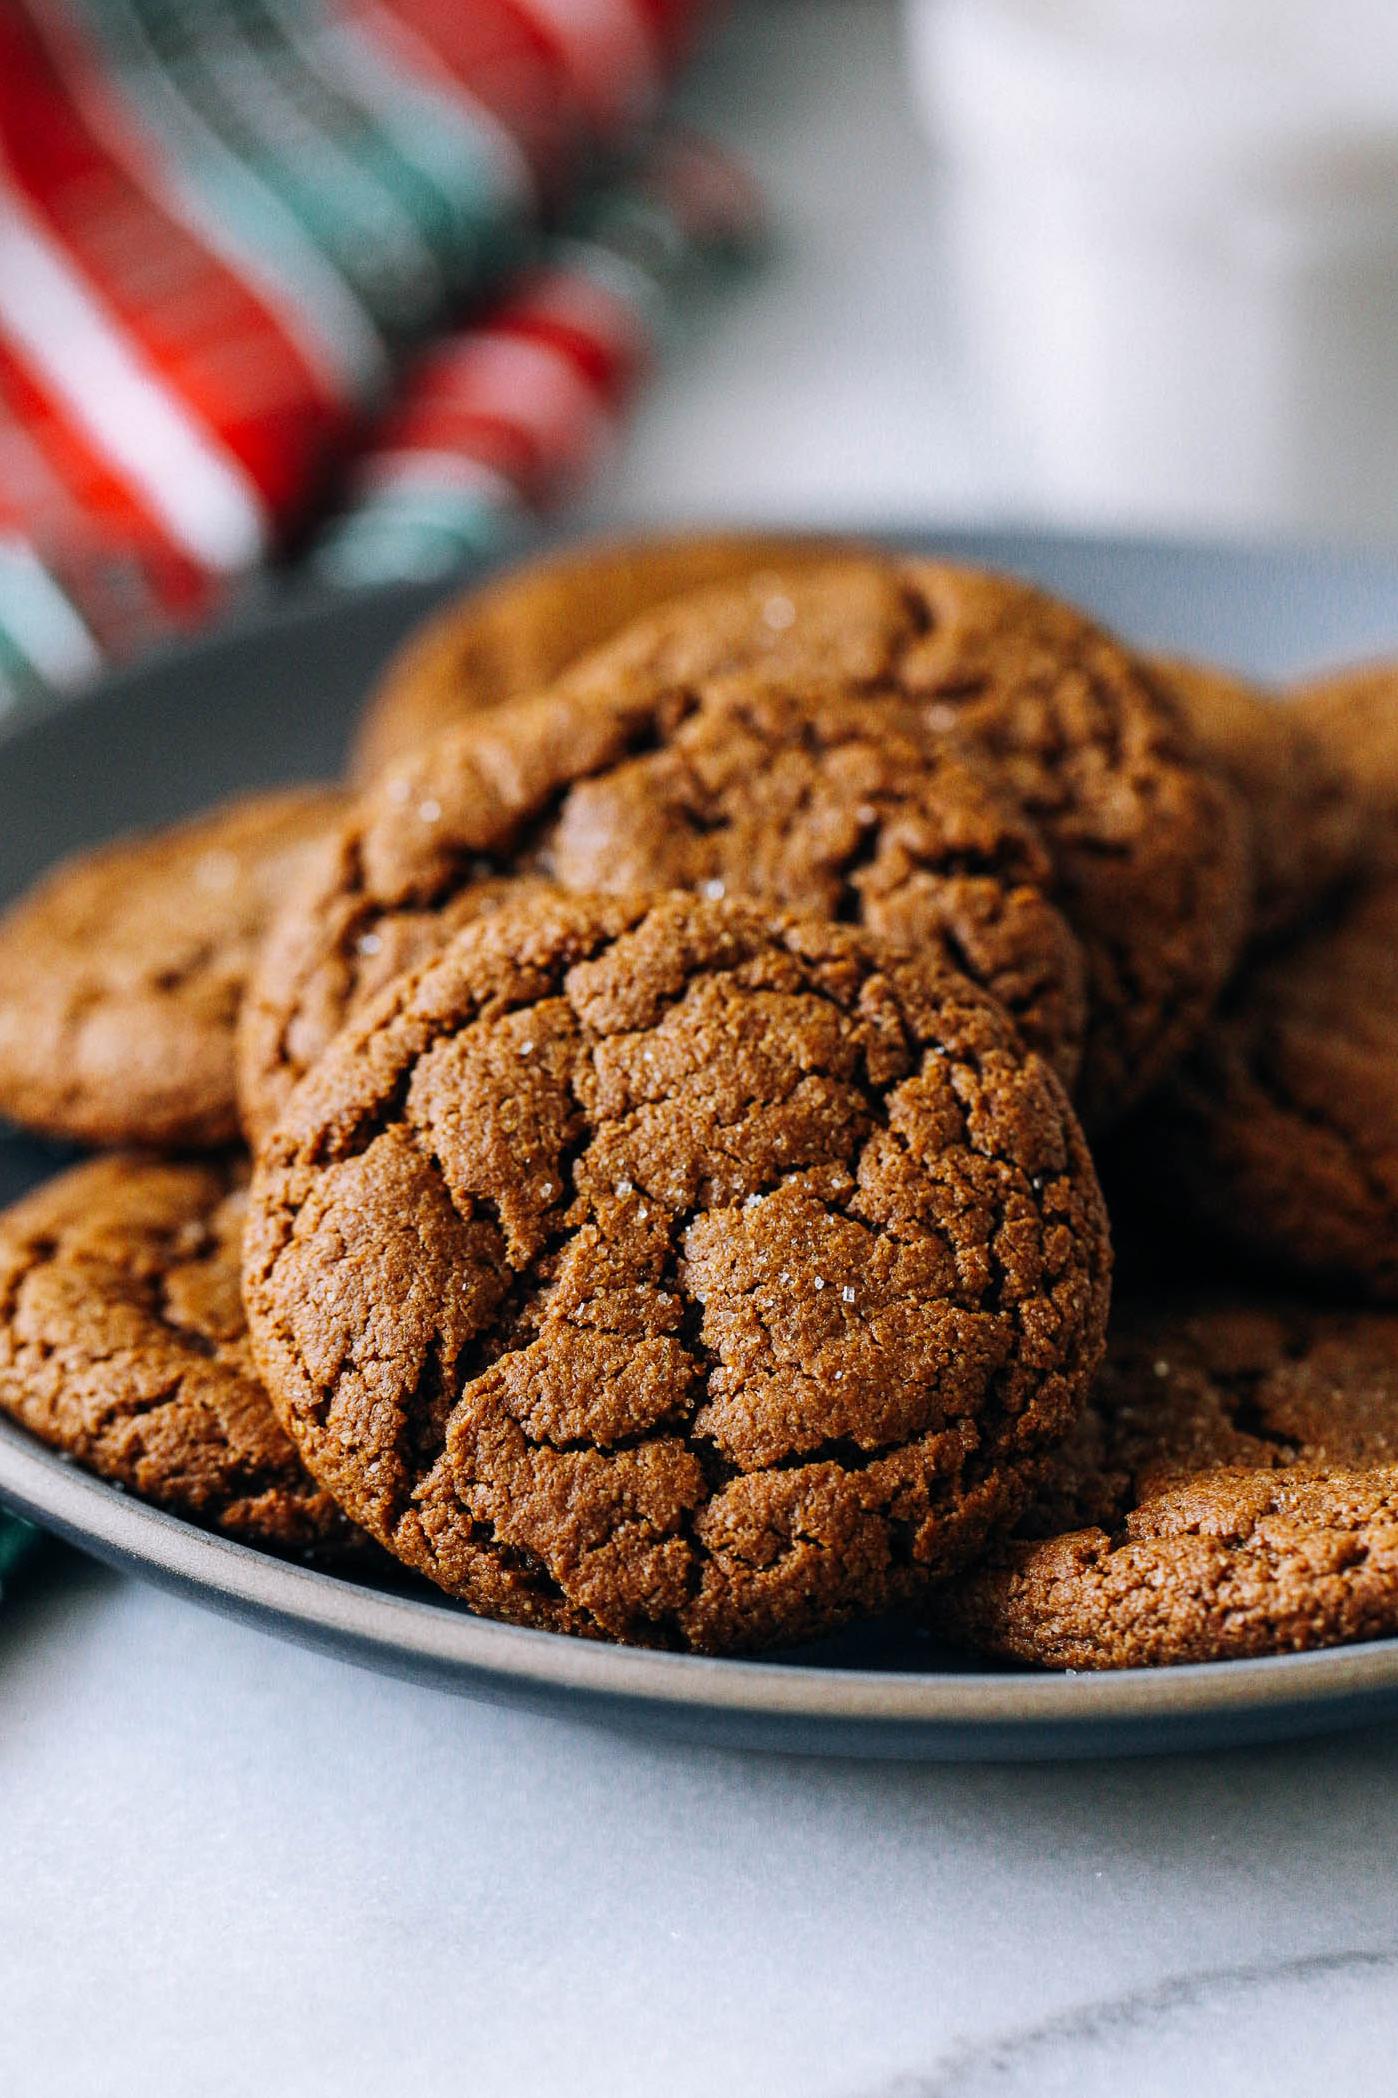  Warm spices and rich molasses make these gluten-free cookies perfect for fall.